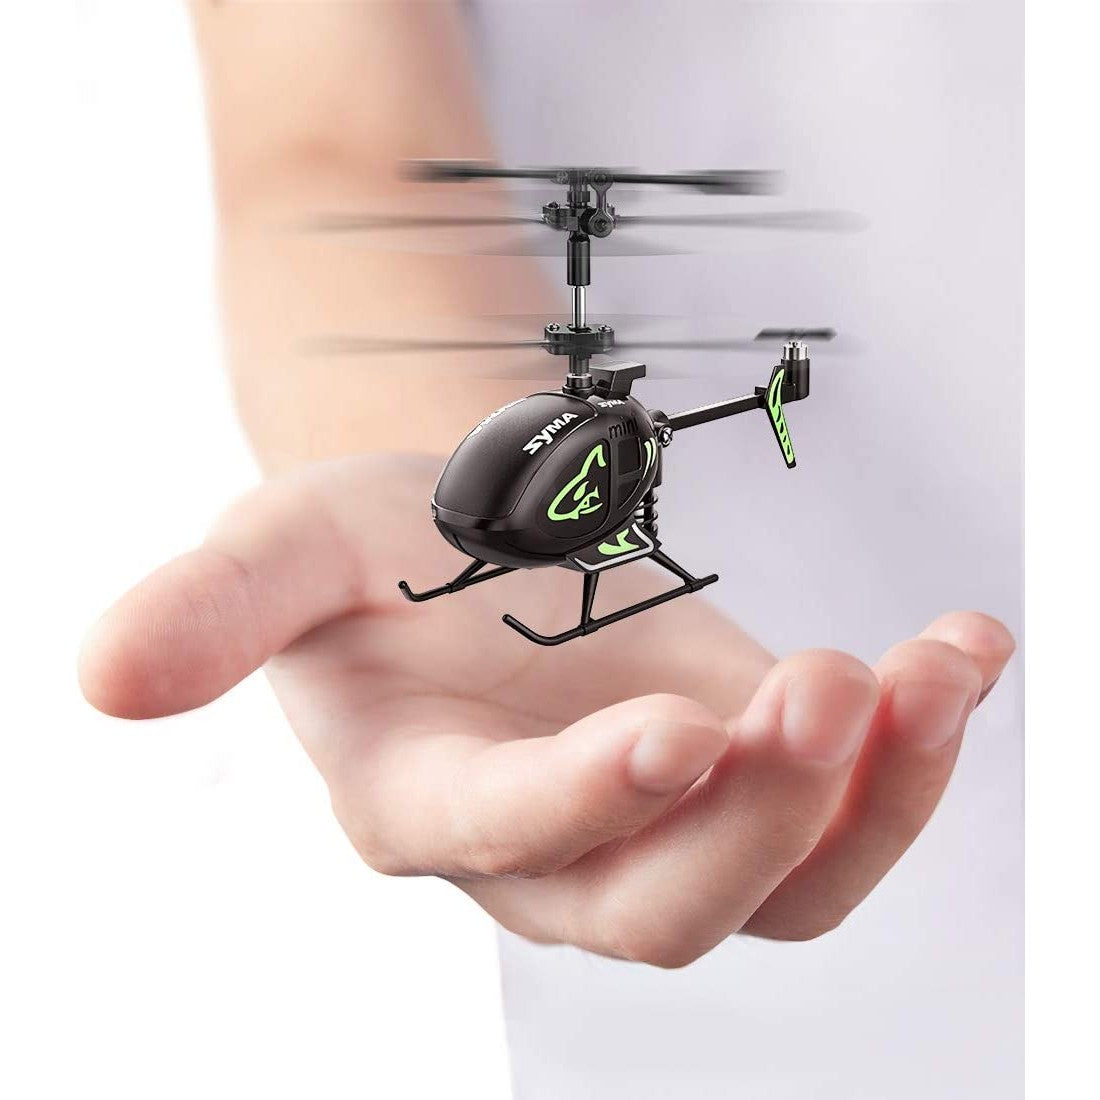 Get ready for some family fun – The best RC helicopter for kids